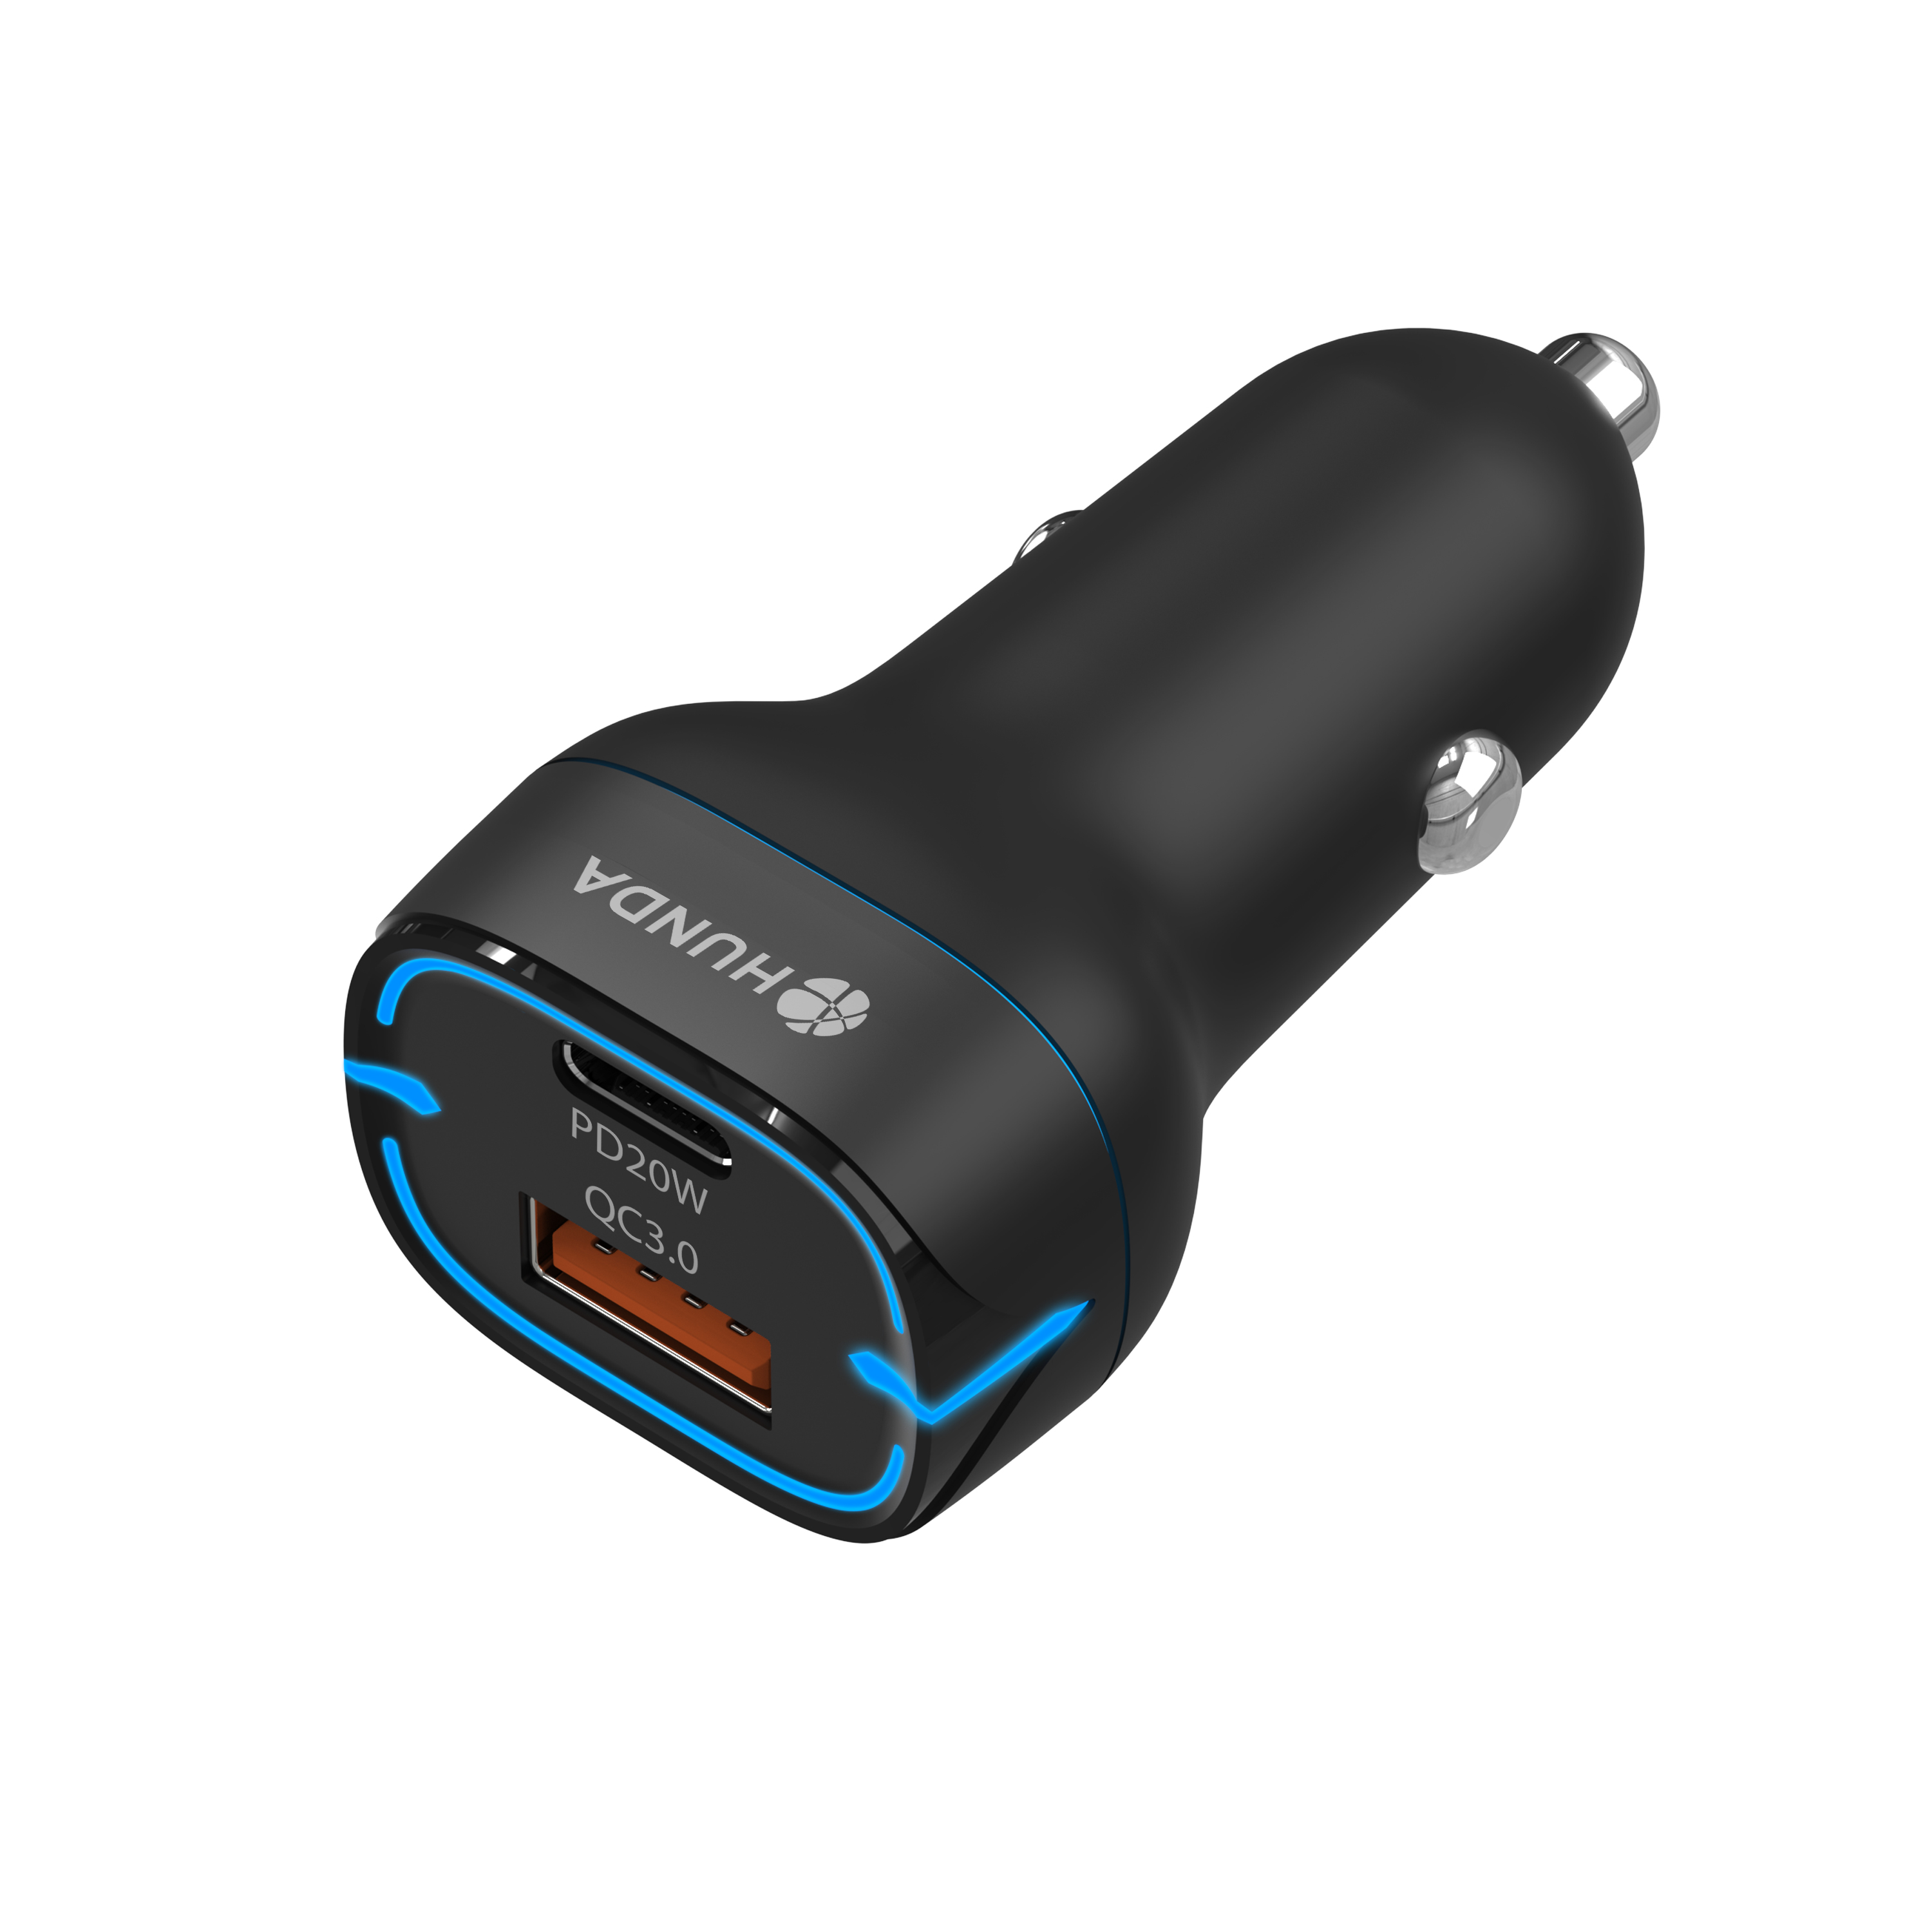 38w 2ports Car Charger -H2201C